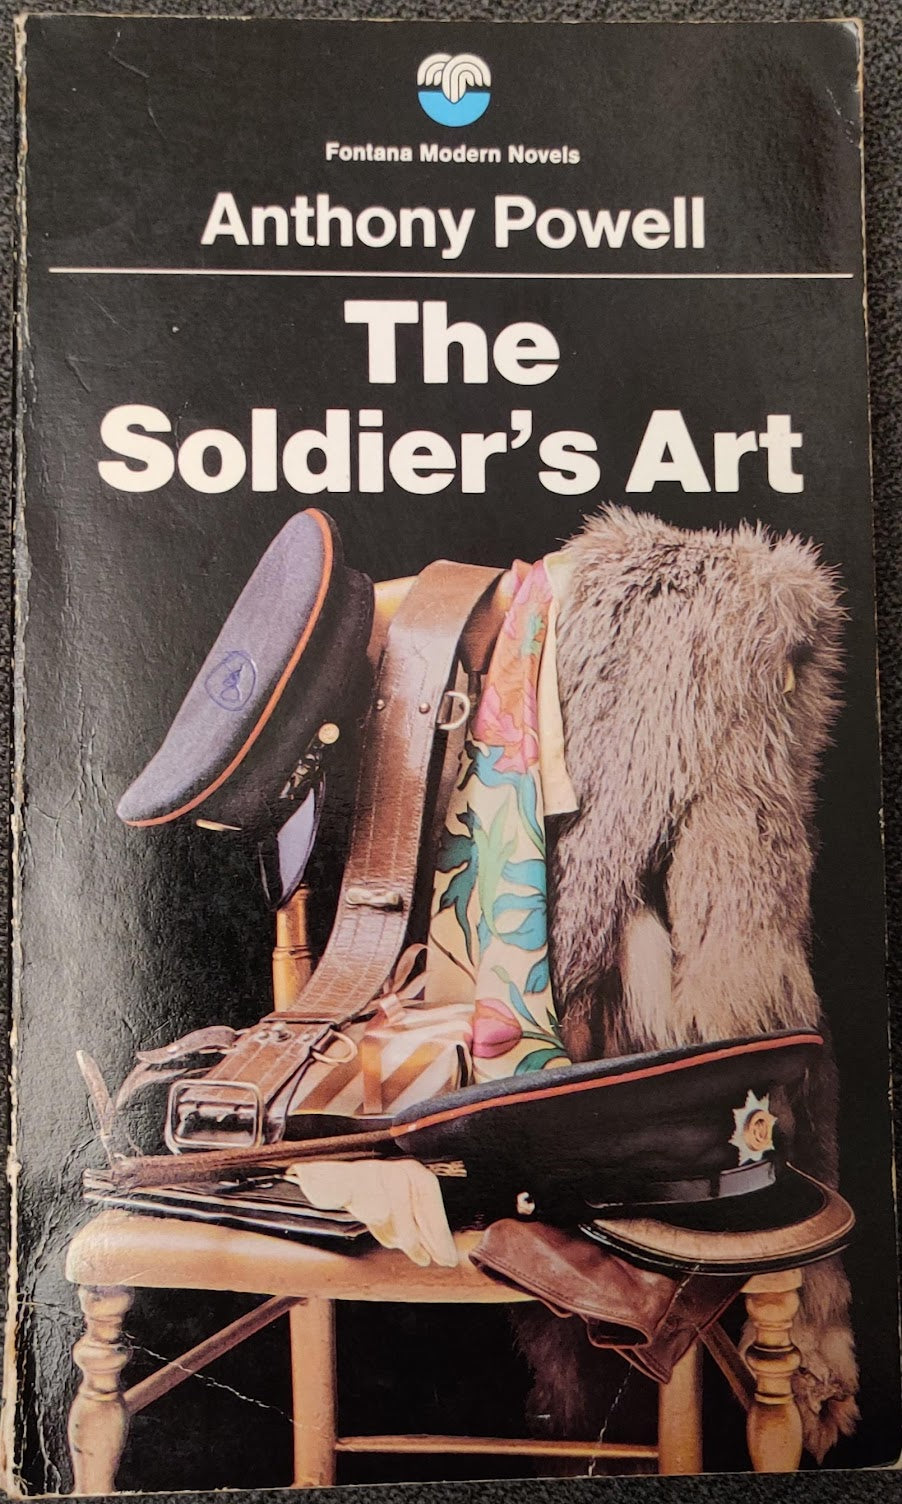 The Soldier's Art by Anthony Powell